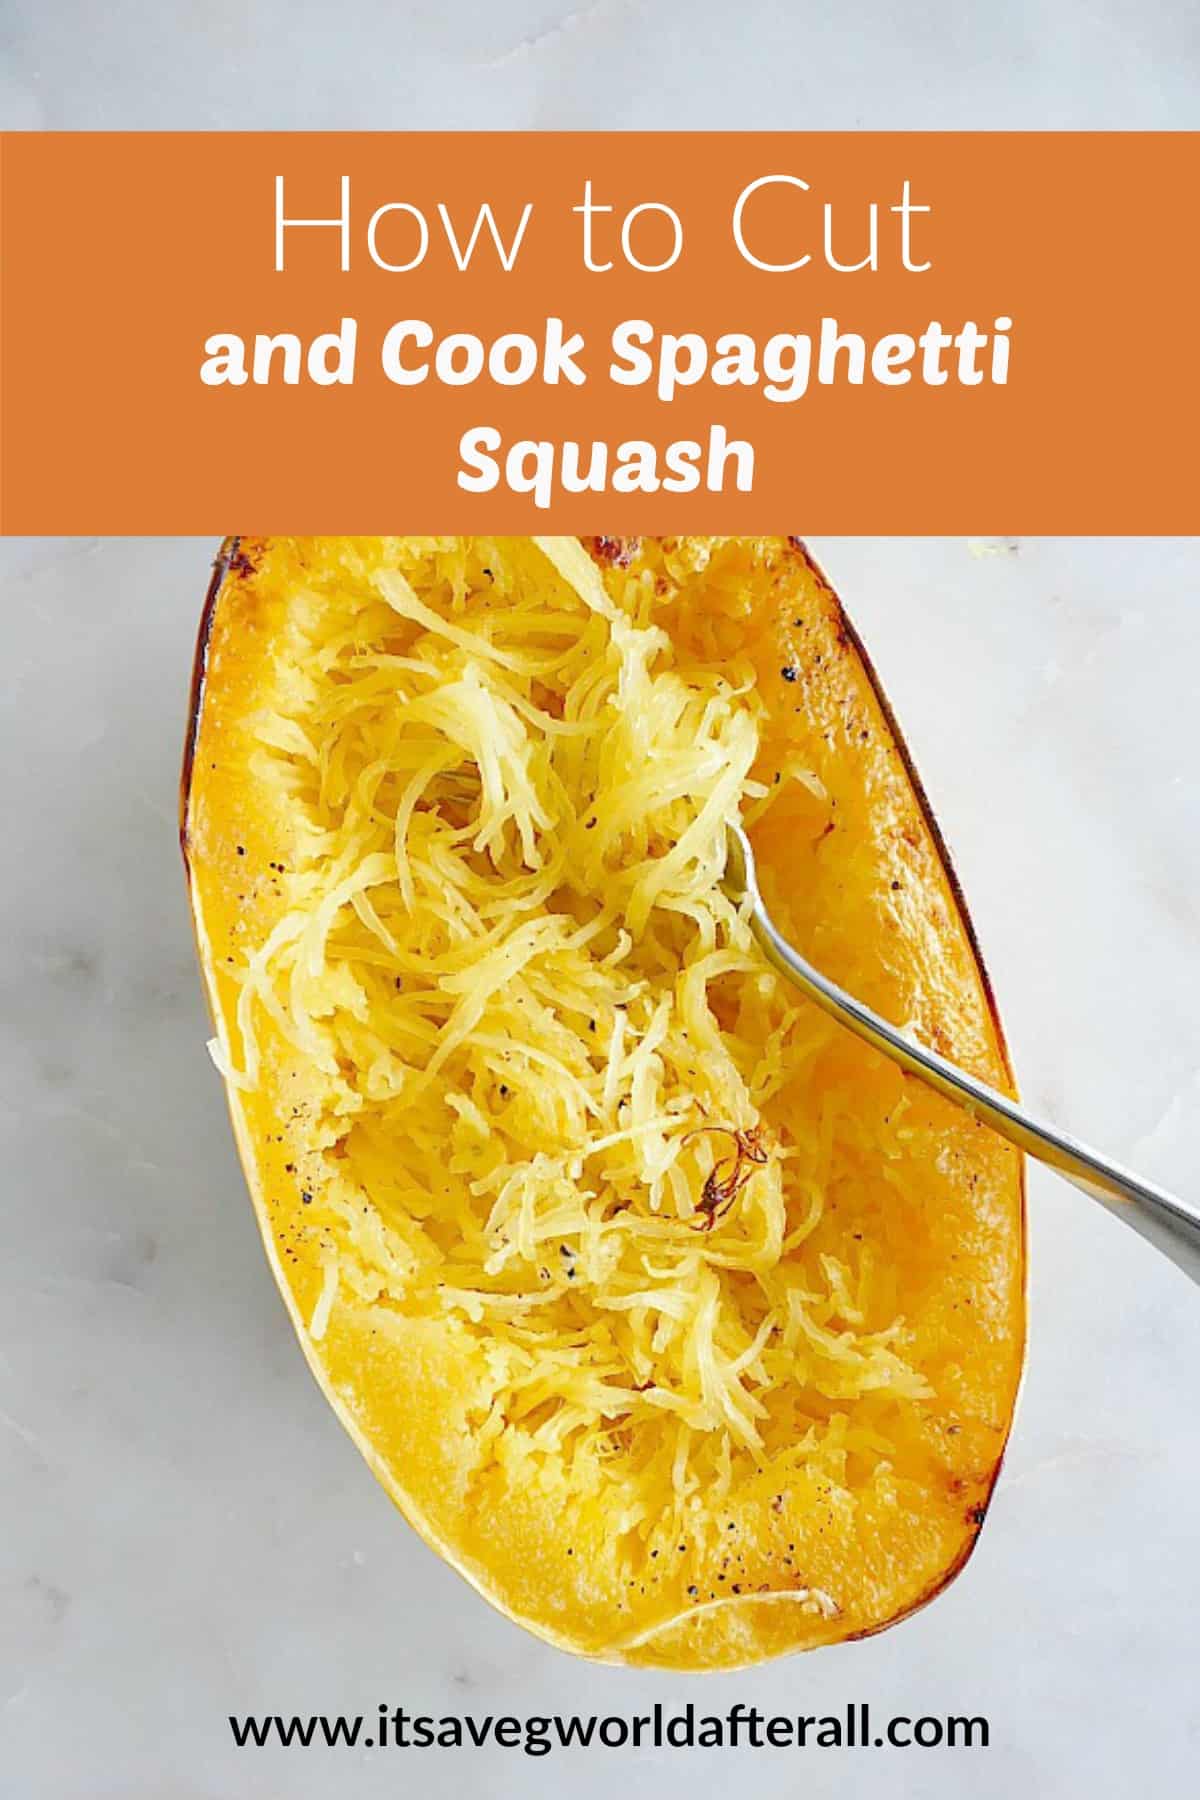 How to Cut Spaghetti Squash (+ Cooking Tips) - It's a Veg World After All®